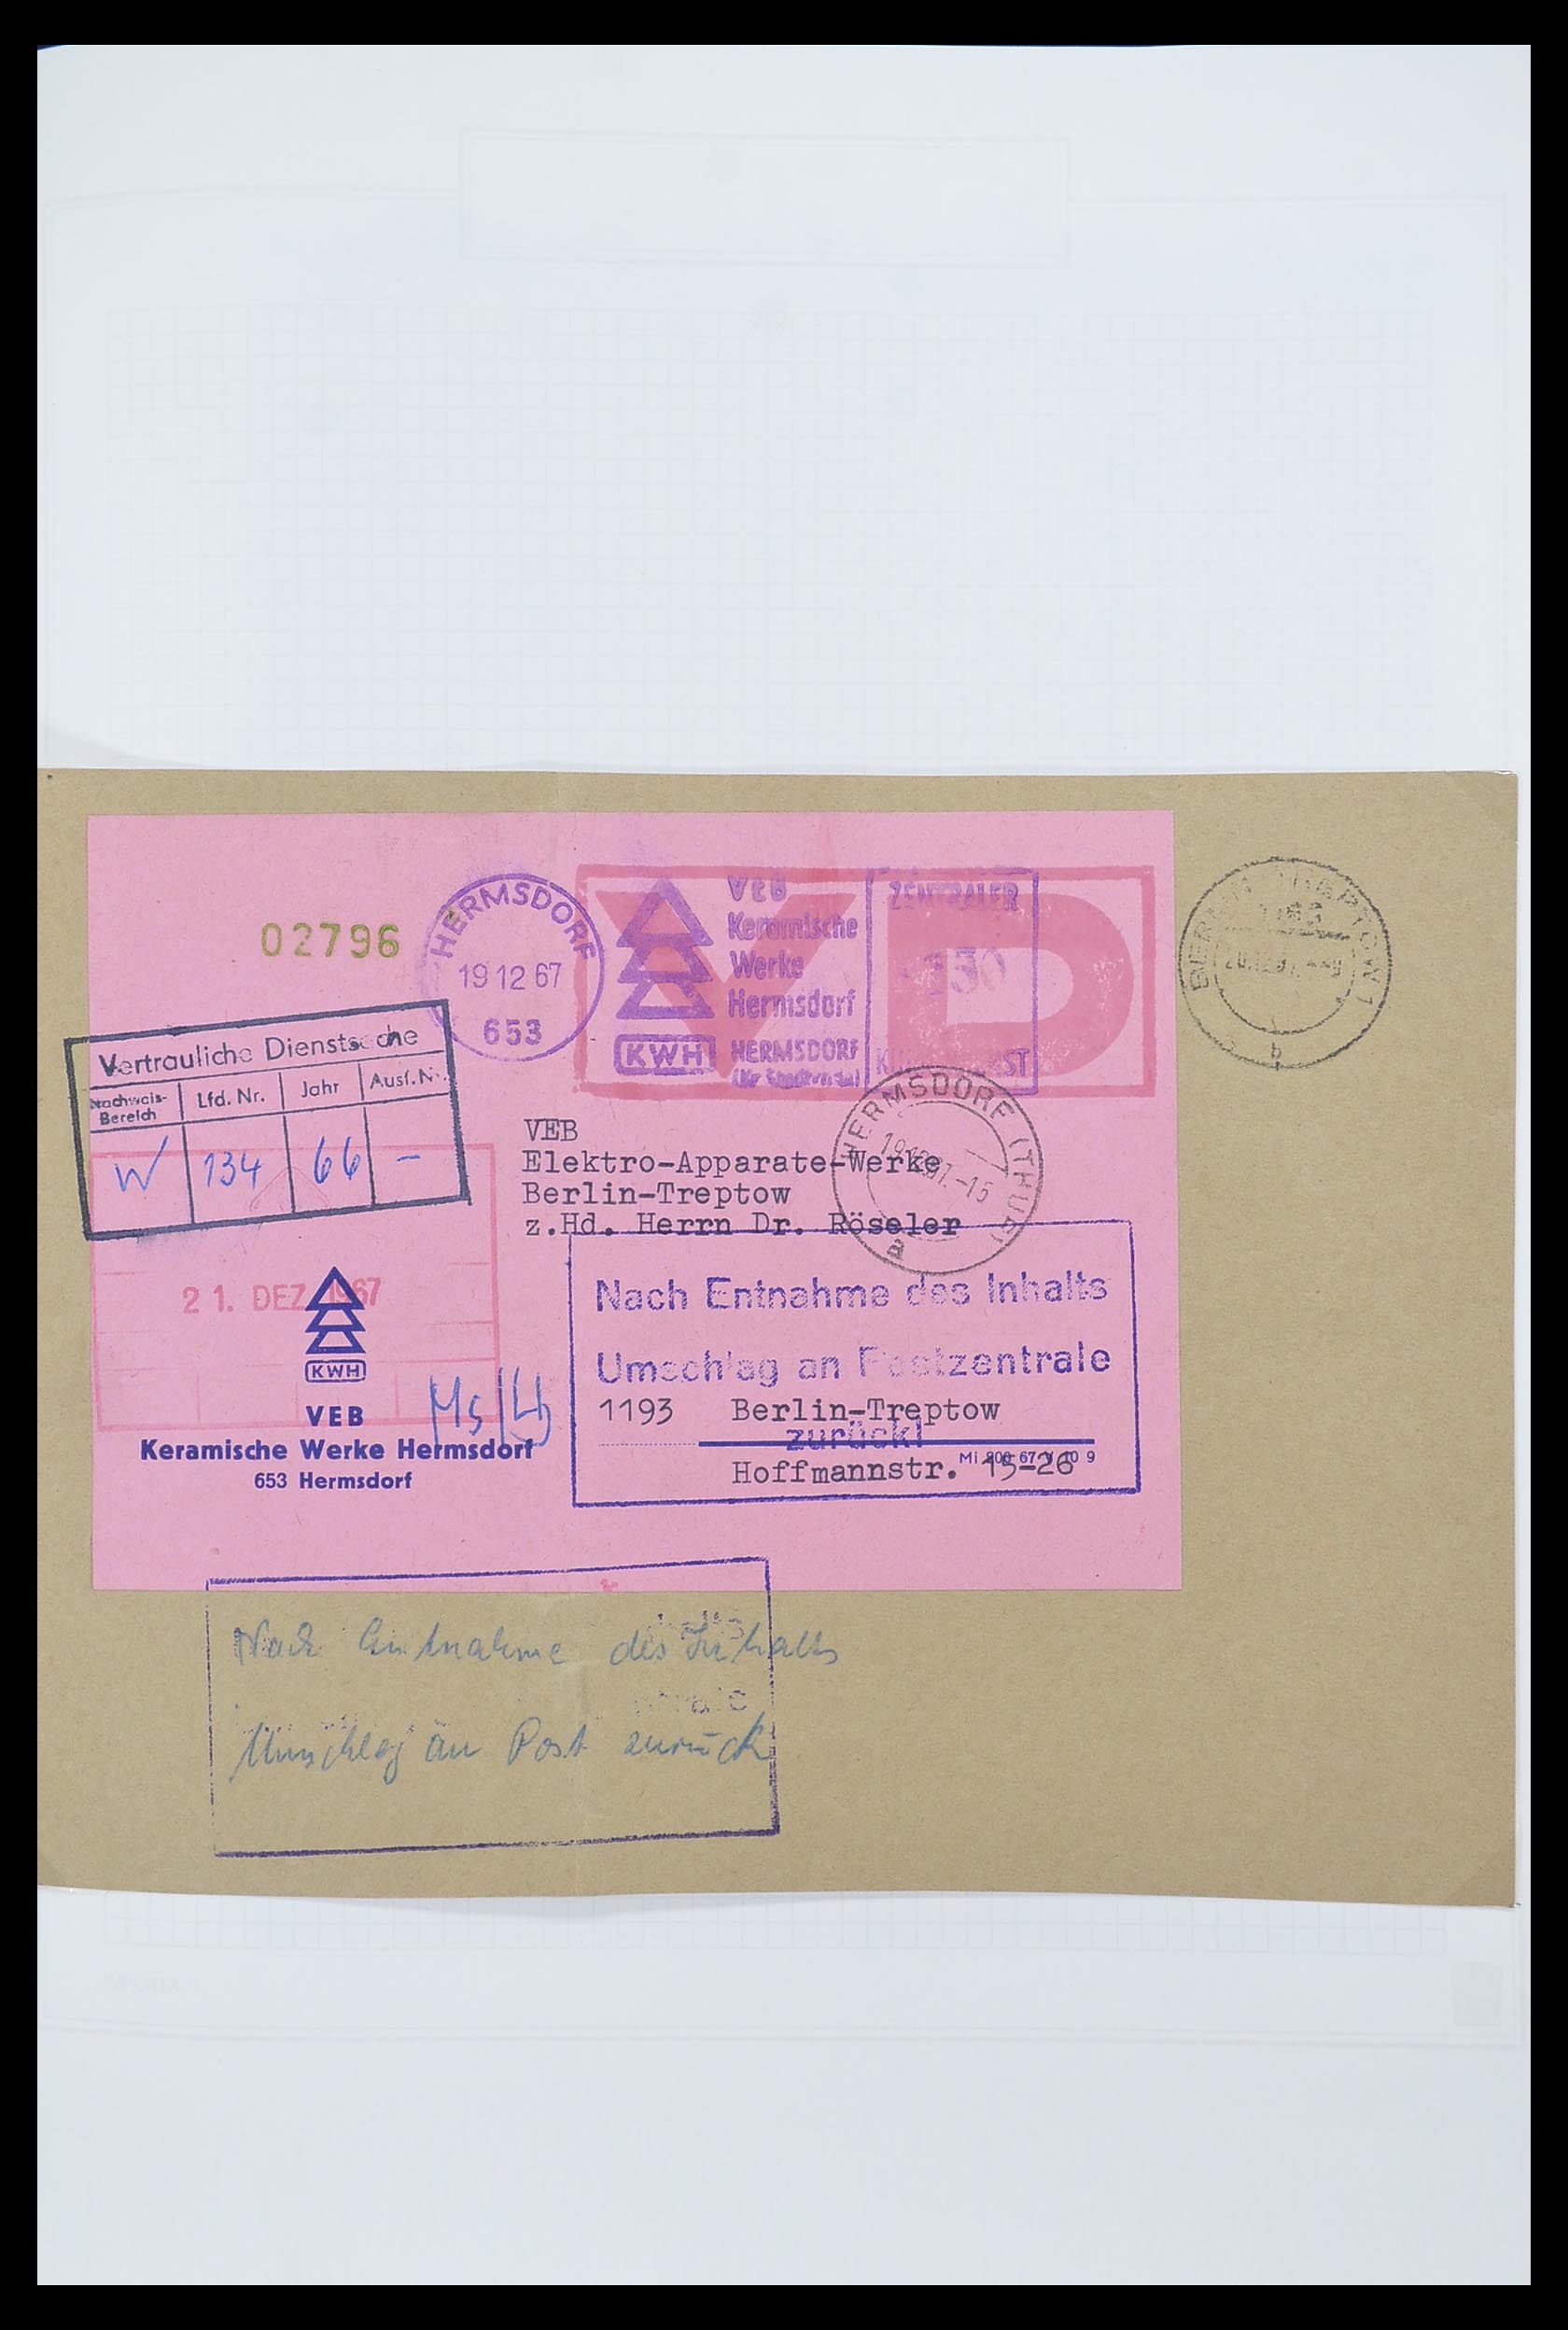 33883 036 - Stamp collection 33883 DDR service covers 1956-1986.